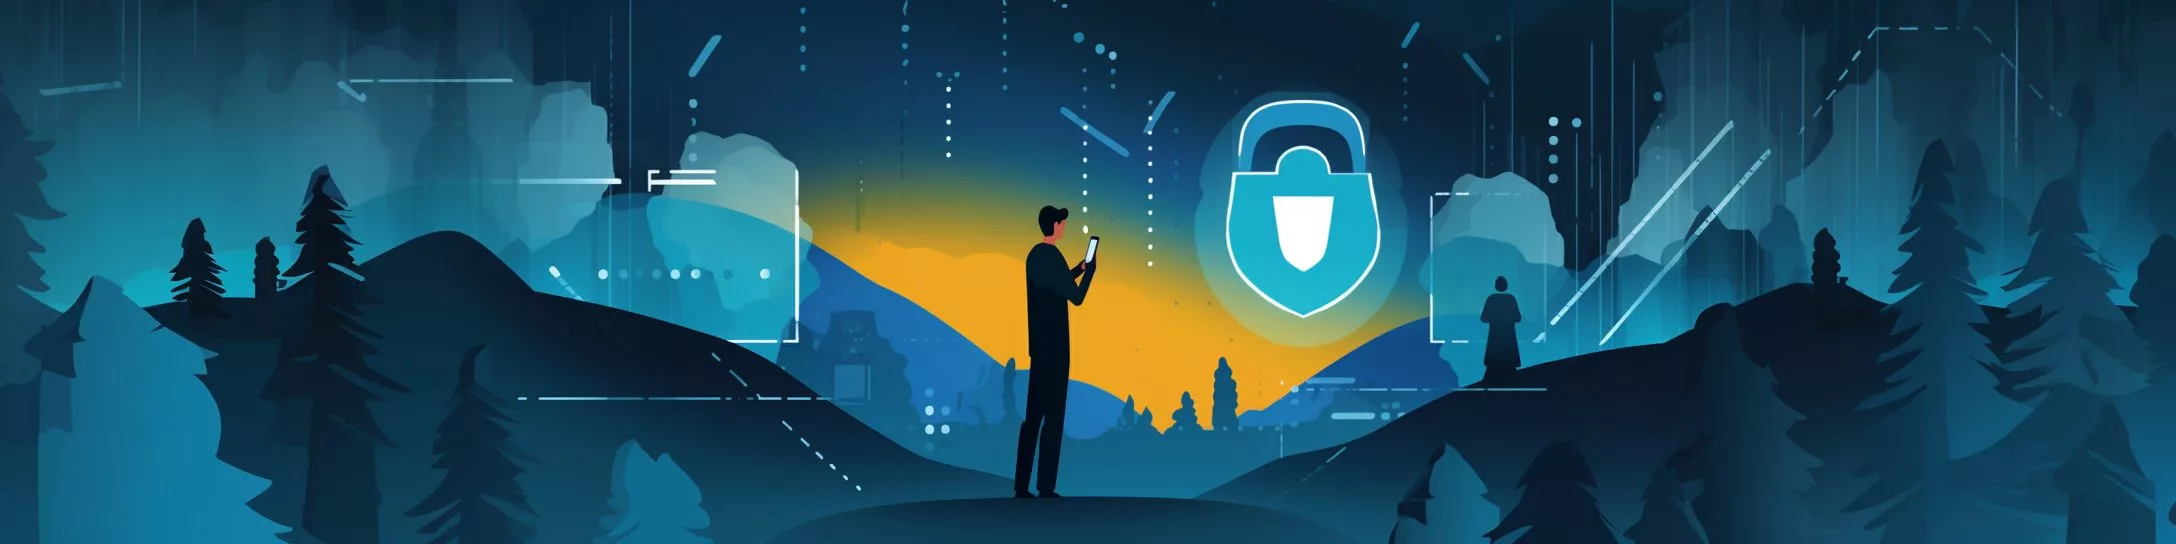 Benefits of VPN for protecting your identity and personal information